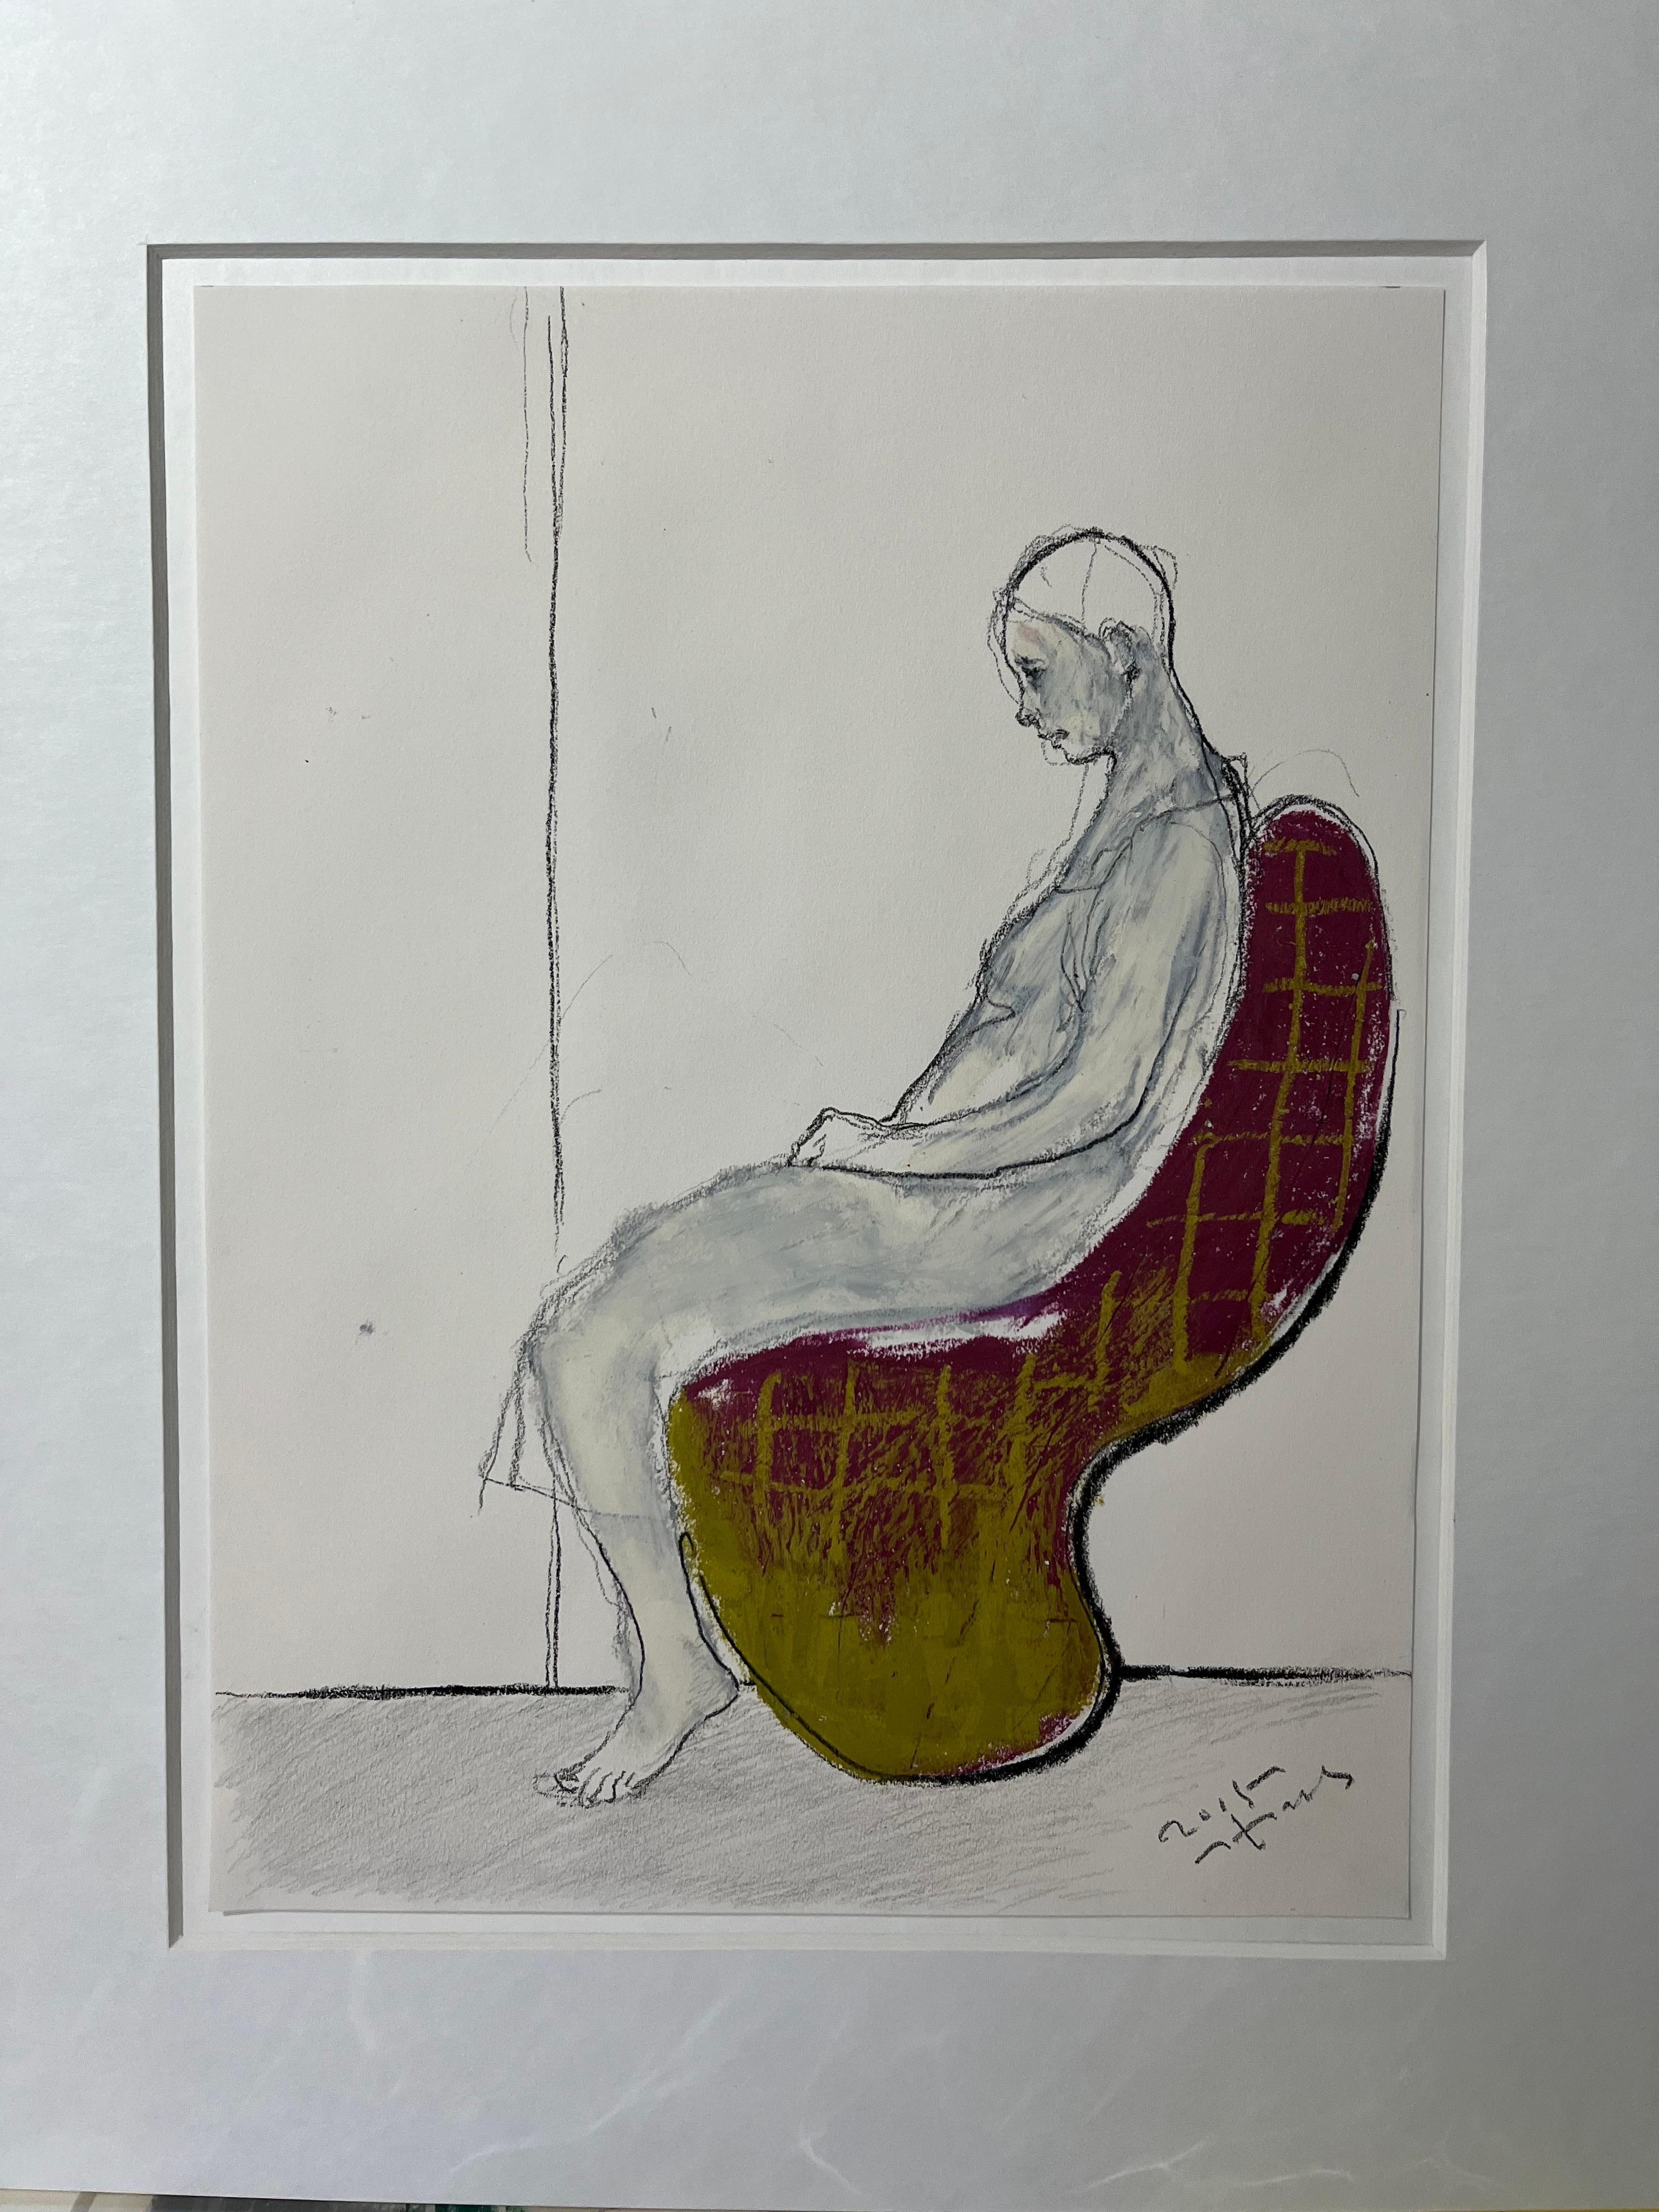 Reminiscent [drawing, Mixed media on paper, portrait, Red, Yellow, Male, Seat] - Gray Portrait Painting by Kiseok Kim